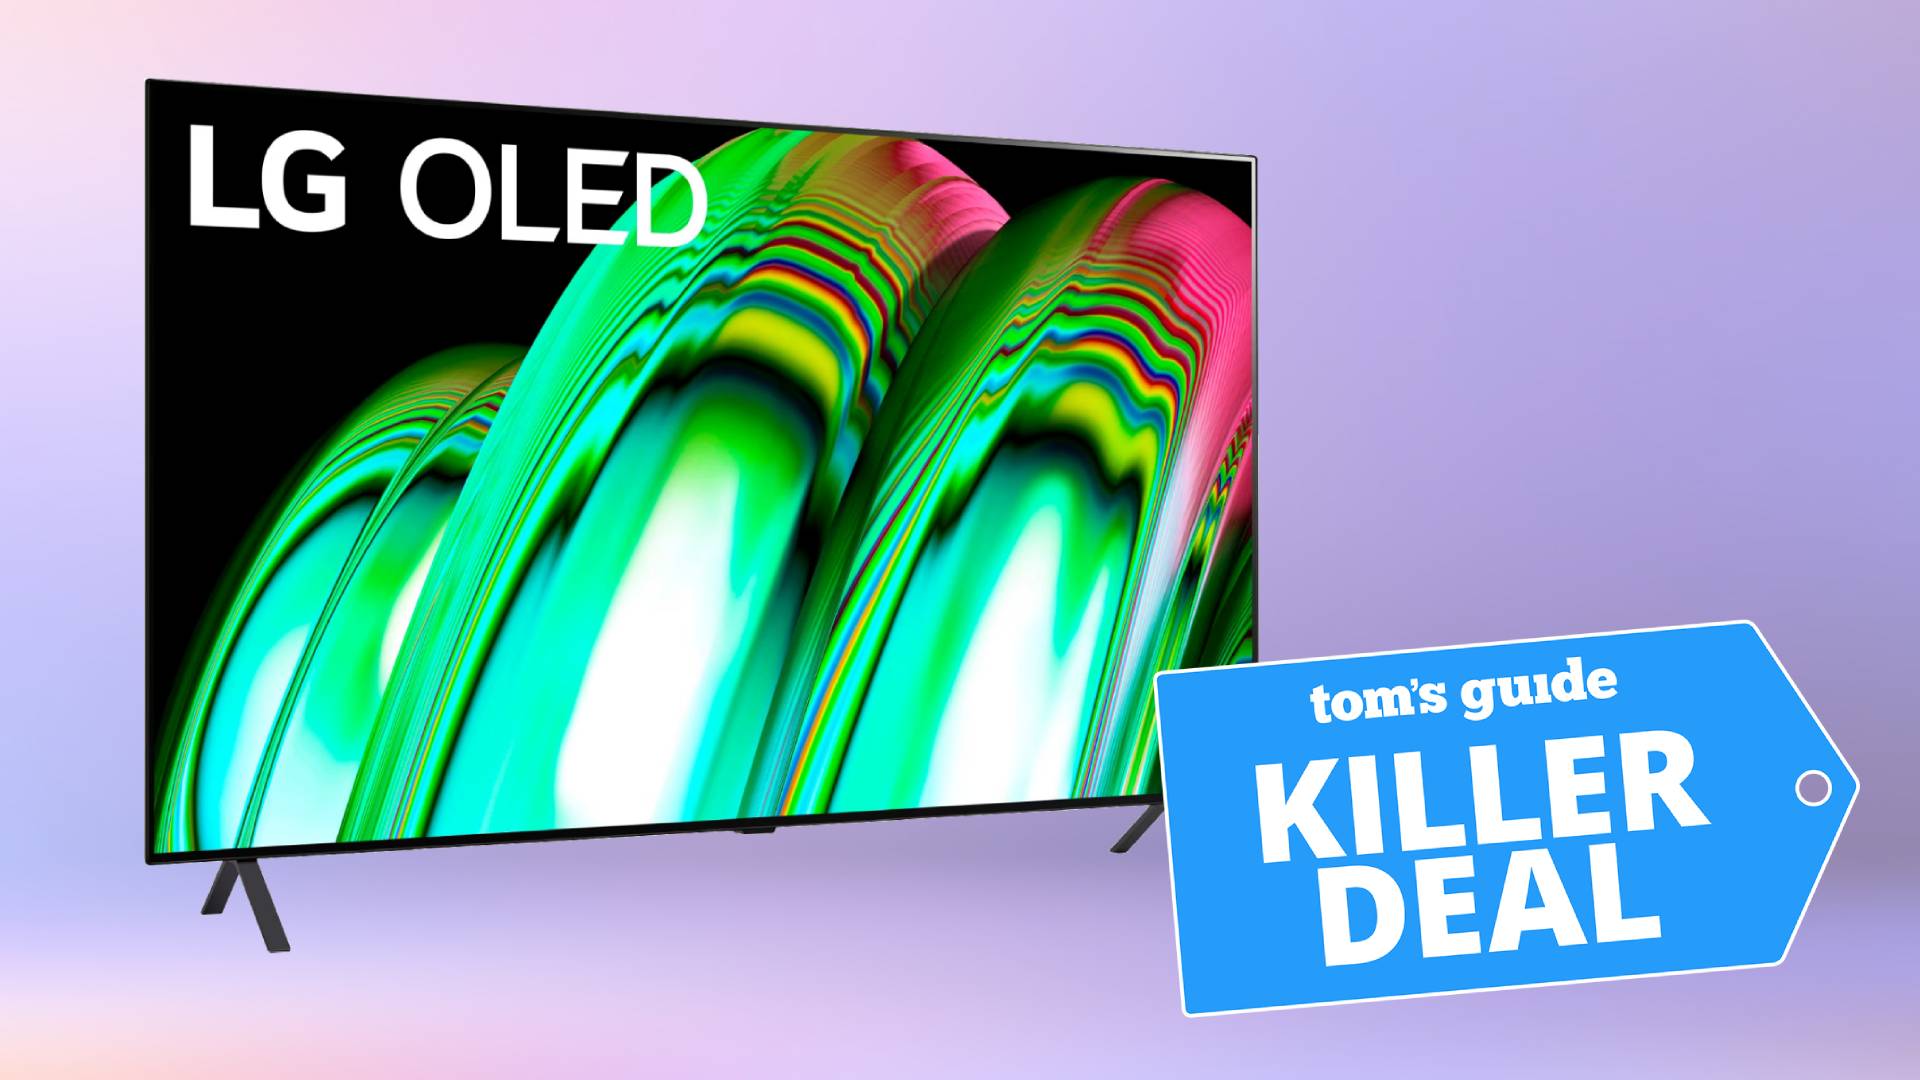 A photo of the LG A2 OLED 4K TV on a purple background